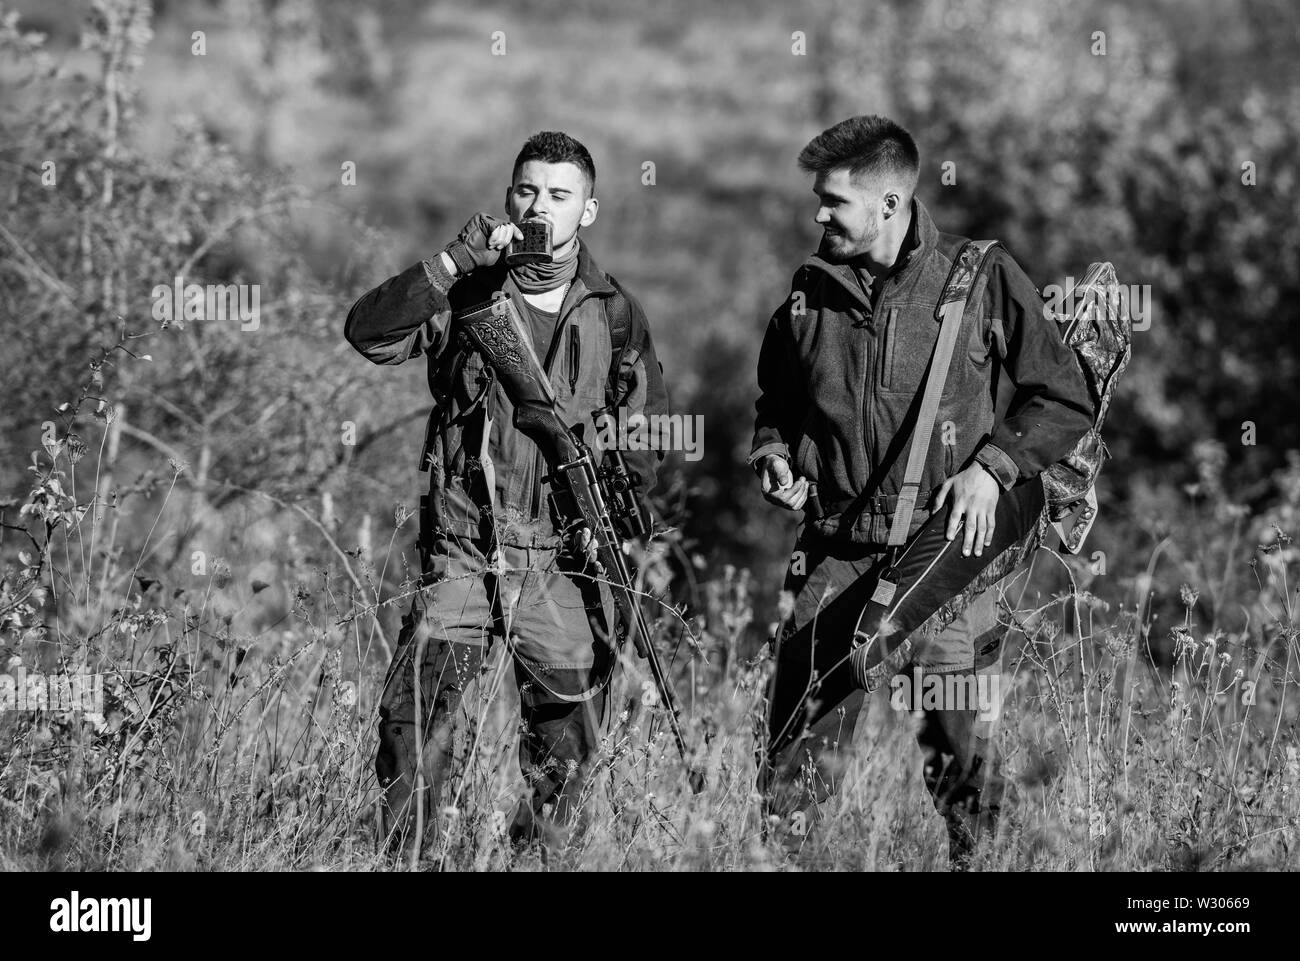 Man hunters with rifle gun. Boot camp. Hunting skills and weapon equipment. How turn hunting into hobby. Military uniform fashion. Friendship of men hunters. Hunter aiming rifle in forest. Stock Photo